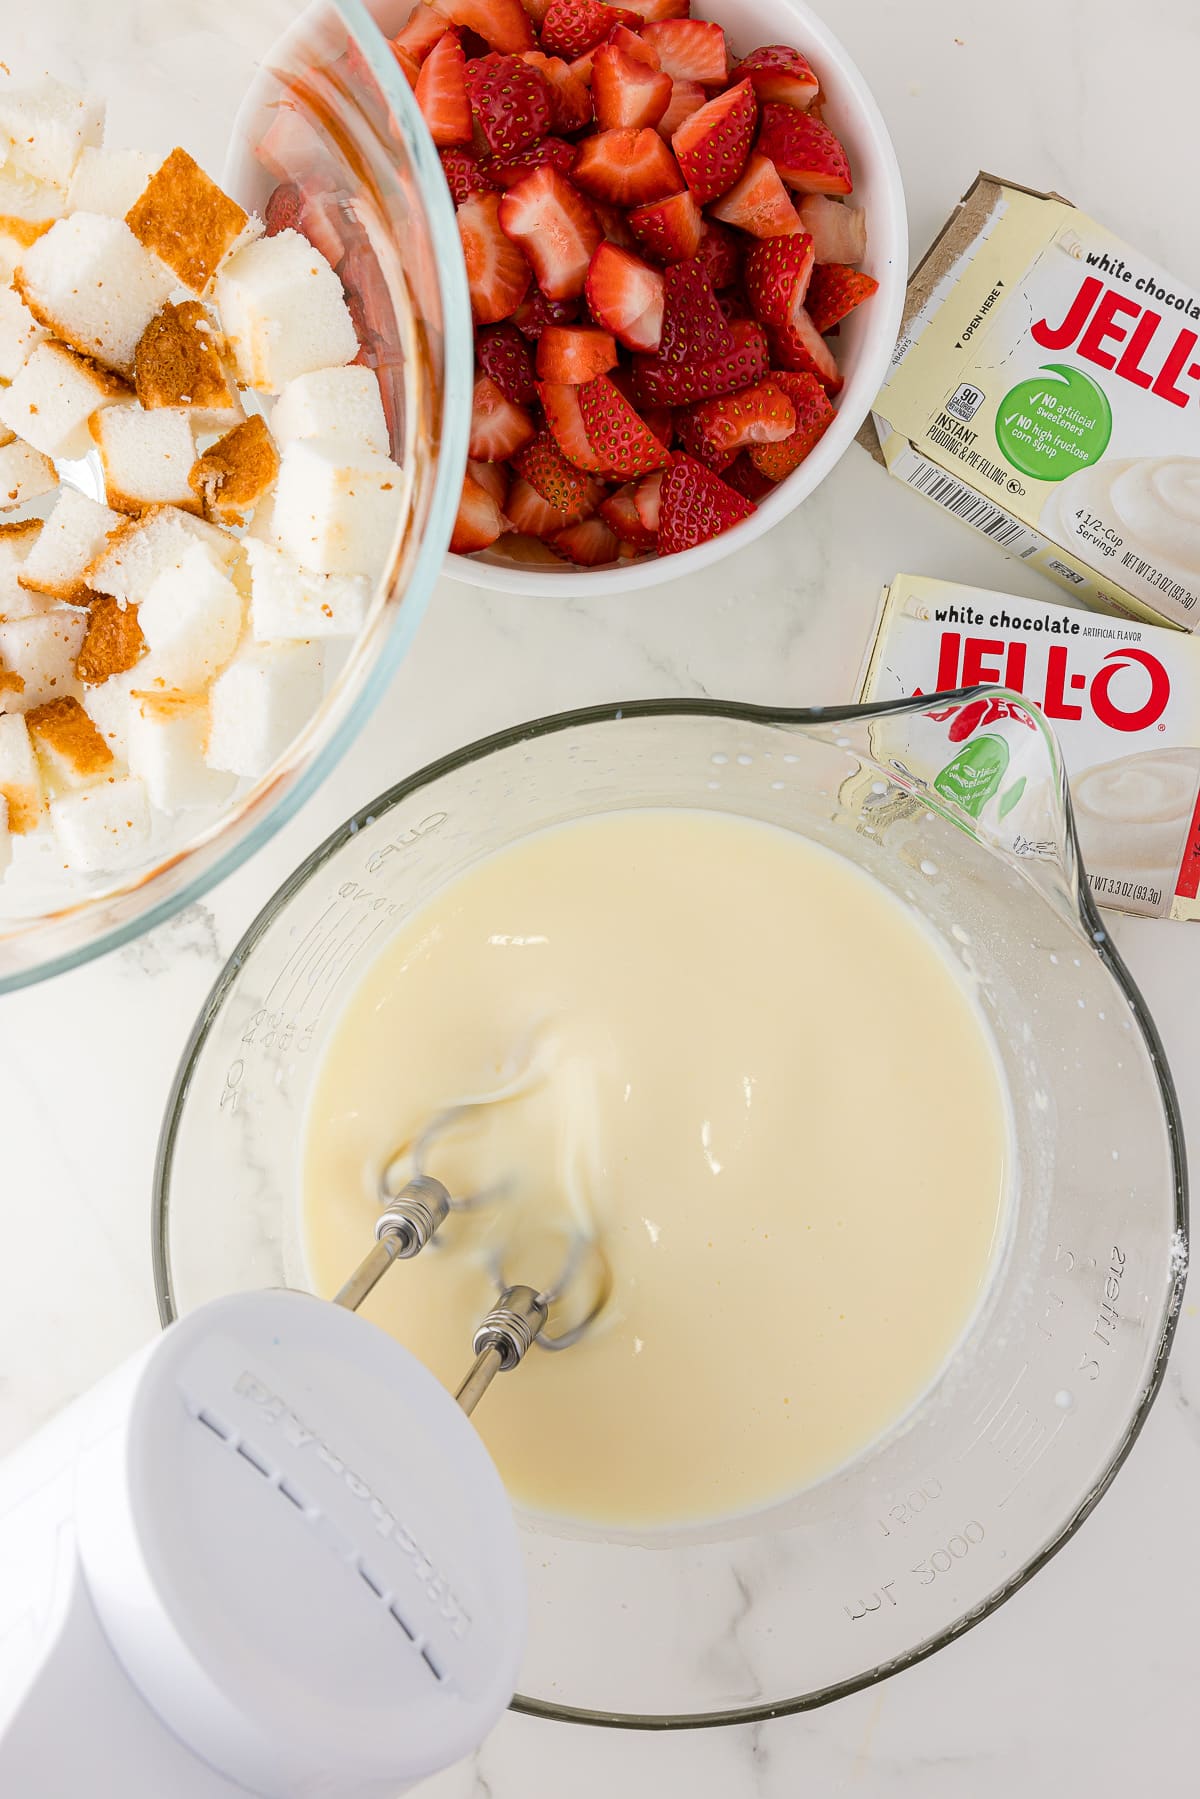 Hand held mixer in a large measuring cup mixing white chocolate pudding, with white chocolate pudding boxes, a bowl of strawberries, and a trifle bowl with a layer of angel food cake on the side